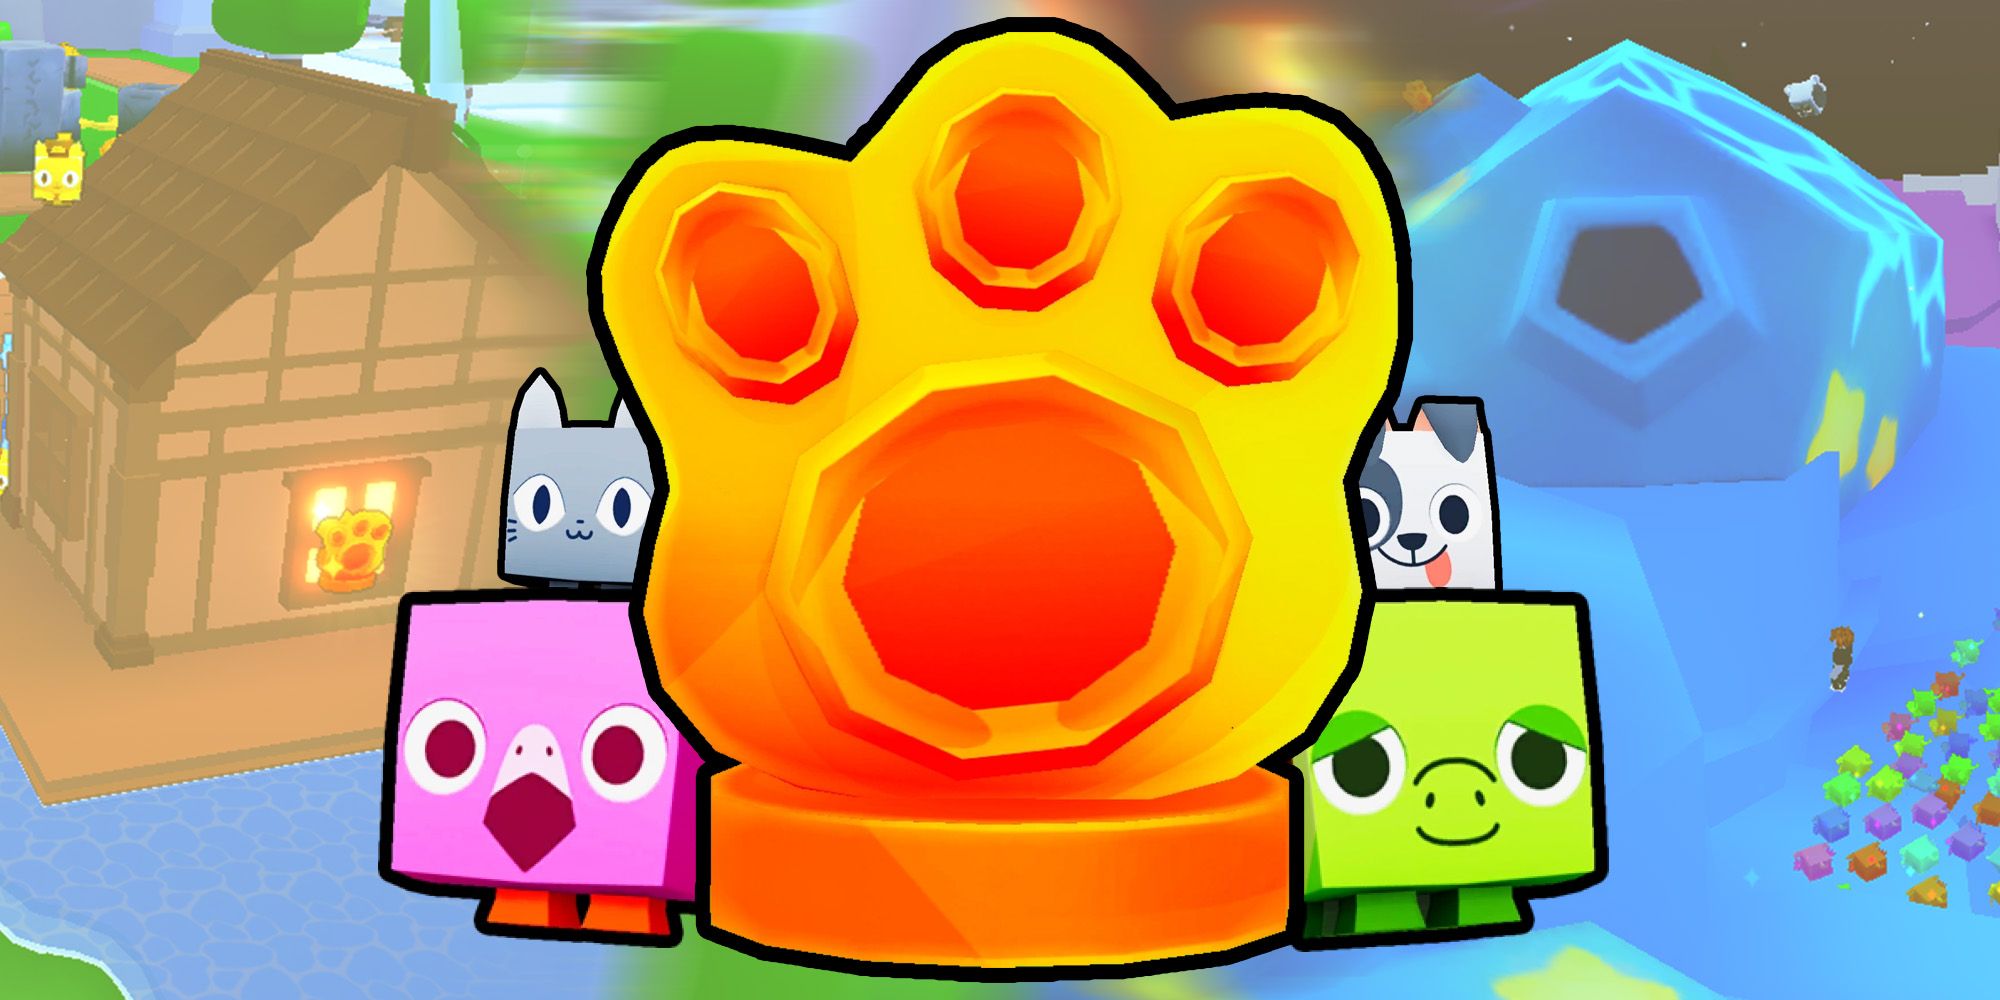 Roblox Pet Simulator 99 - A turtle, a cat, a dog and a flamingo around a huge shiny relic icon